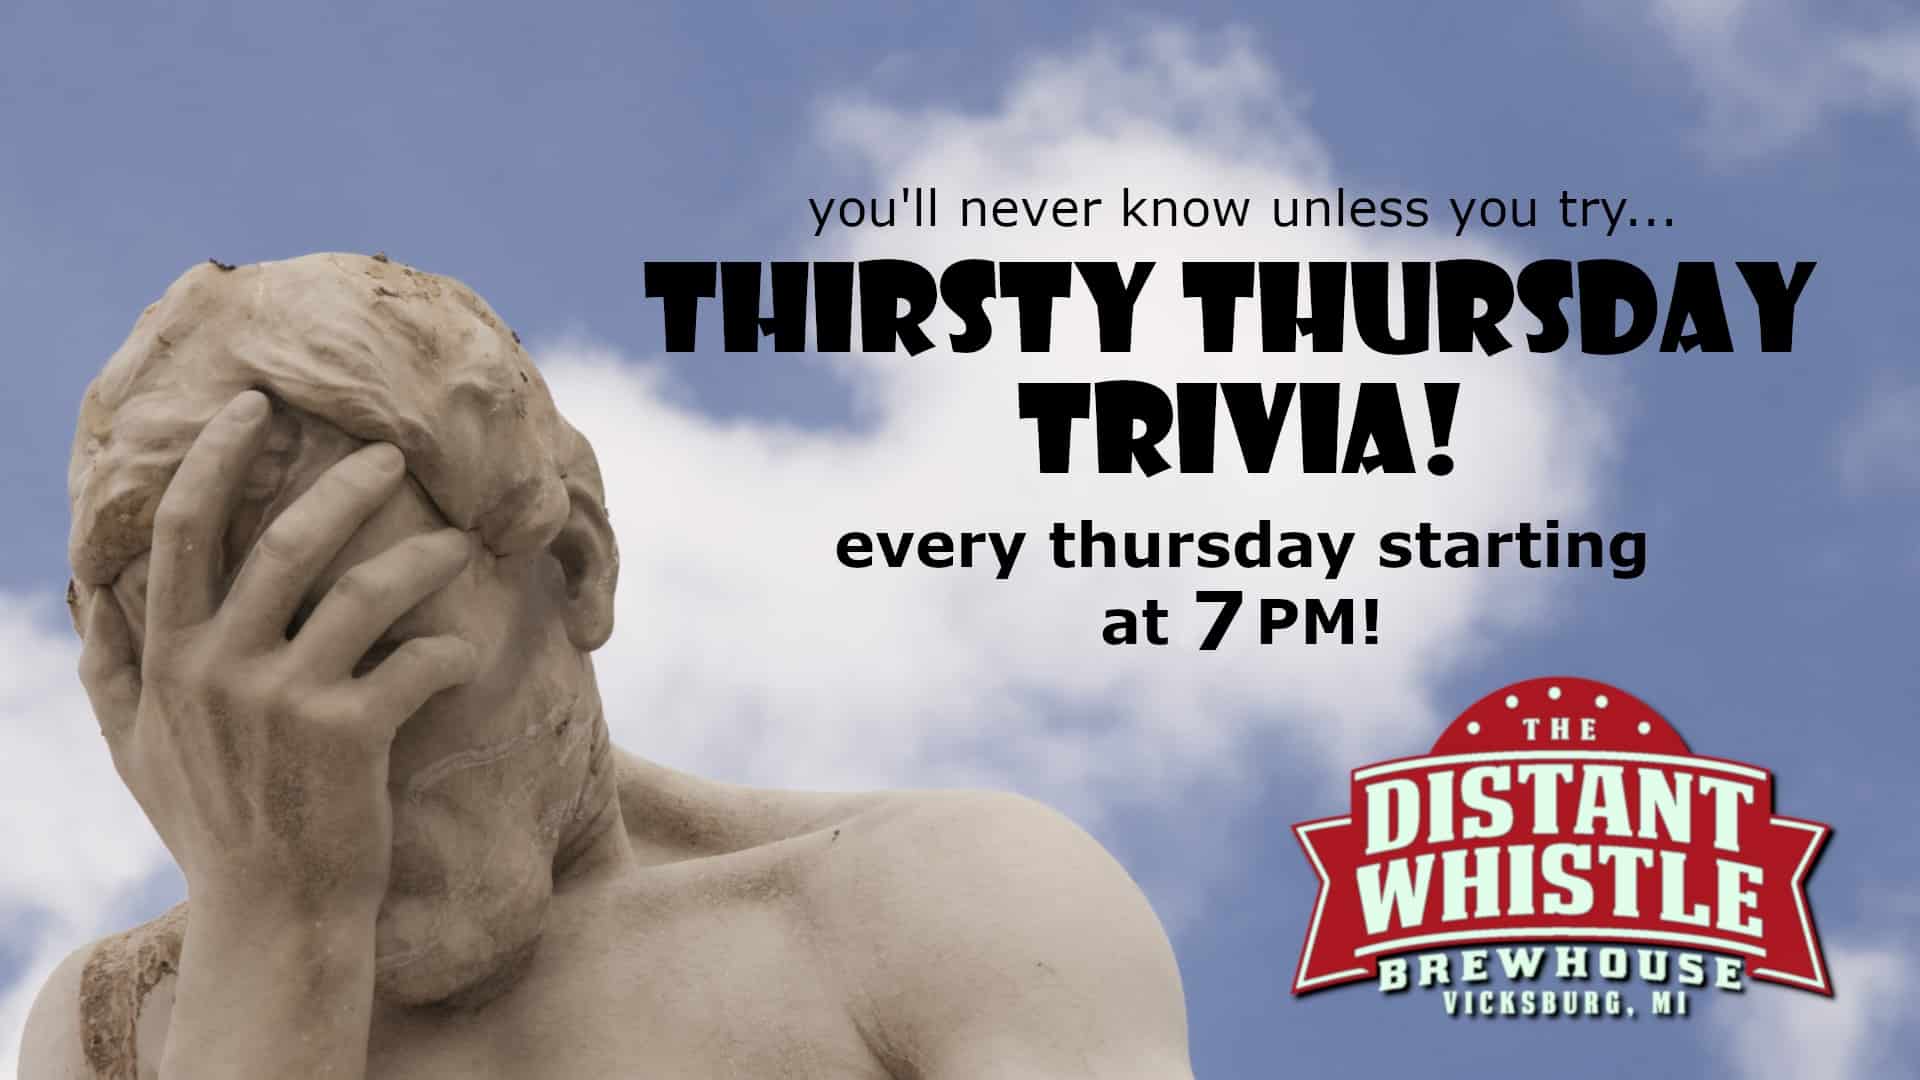 Hey All! Thirsty Thursday Trivia starts tonight at 7 PM! Tonight may be your las